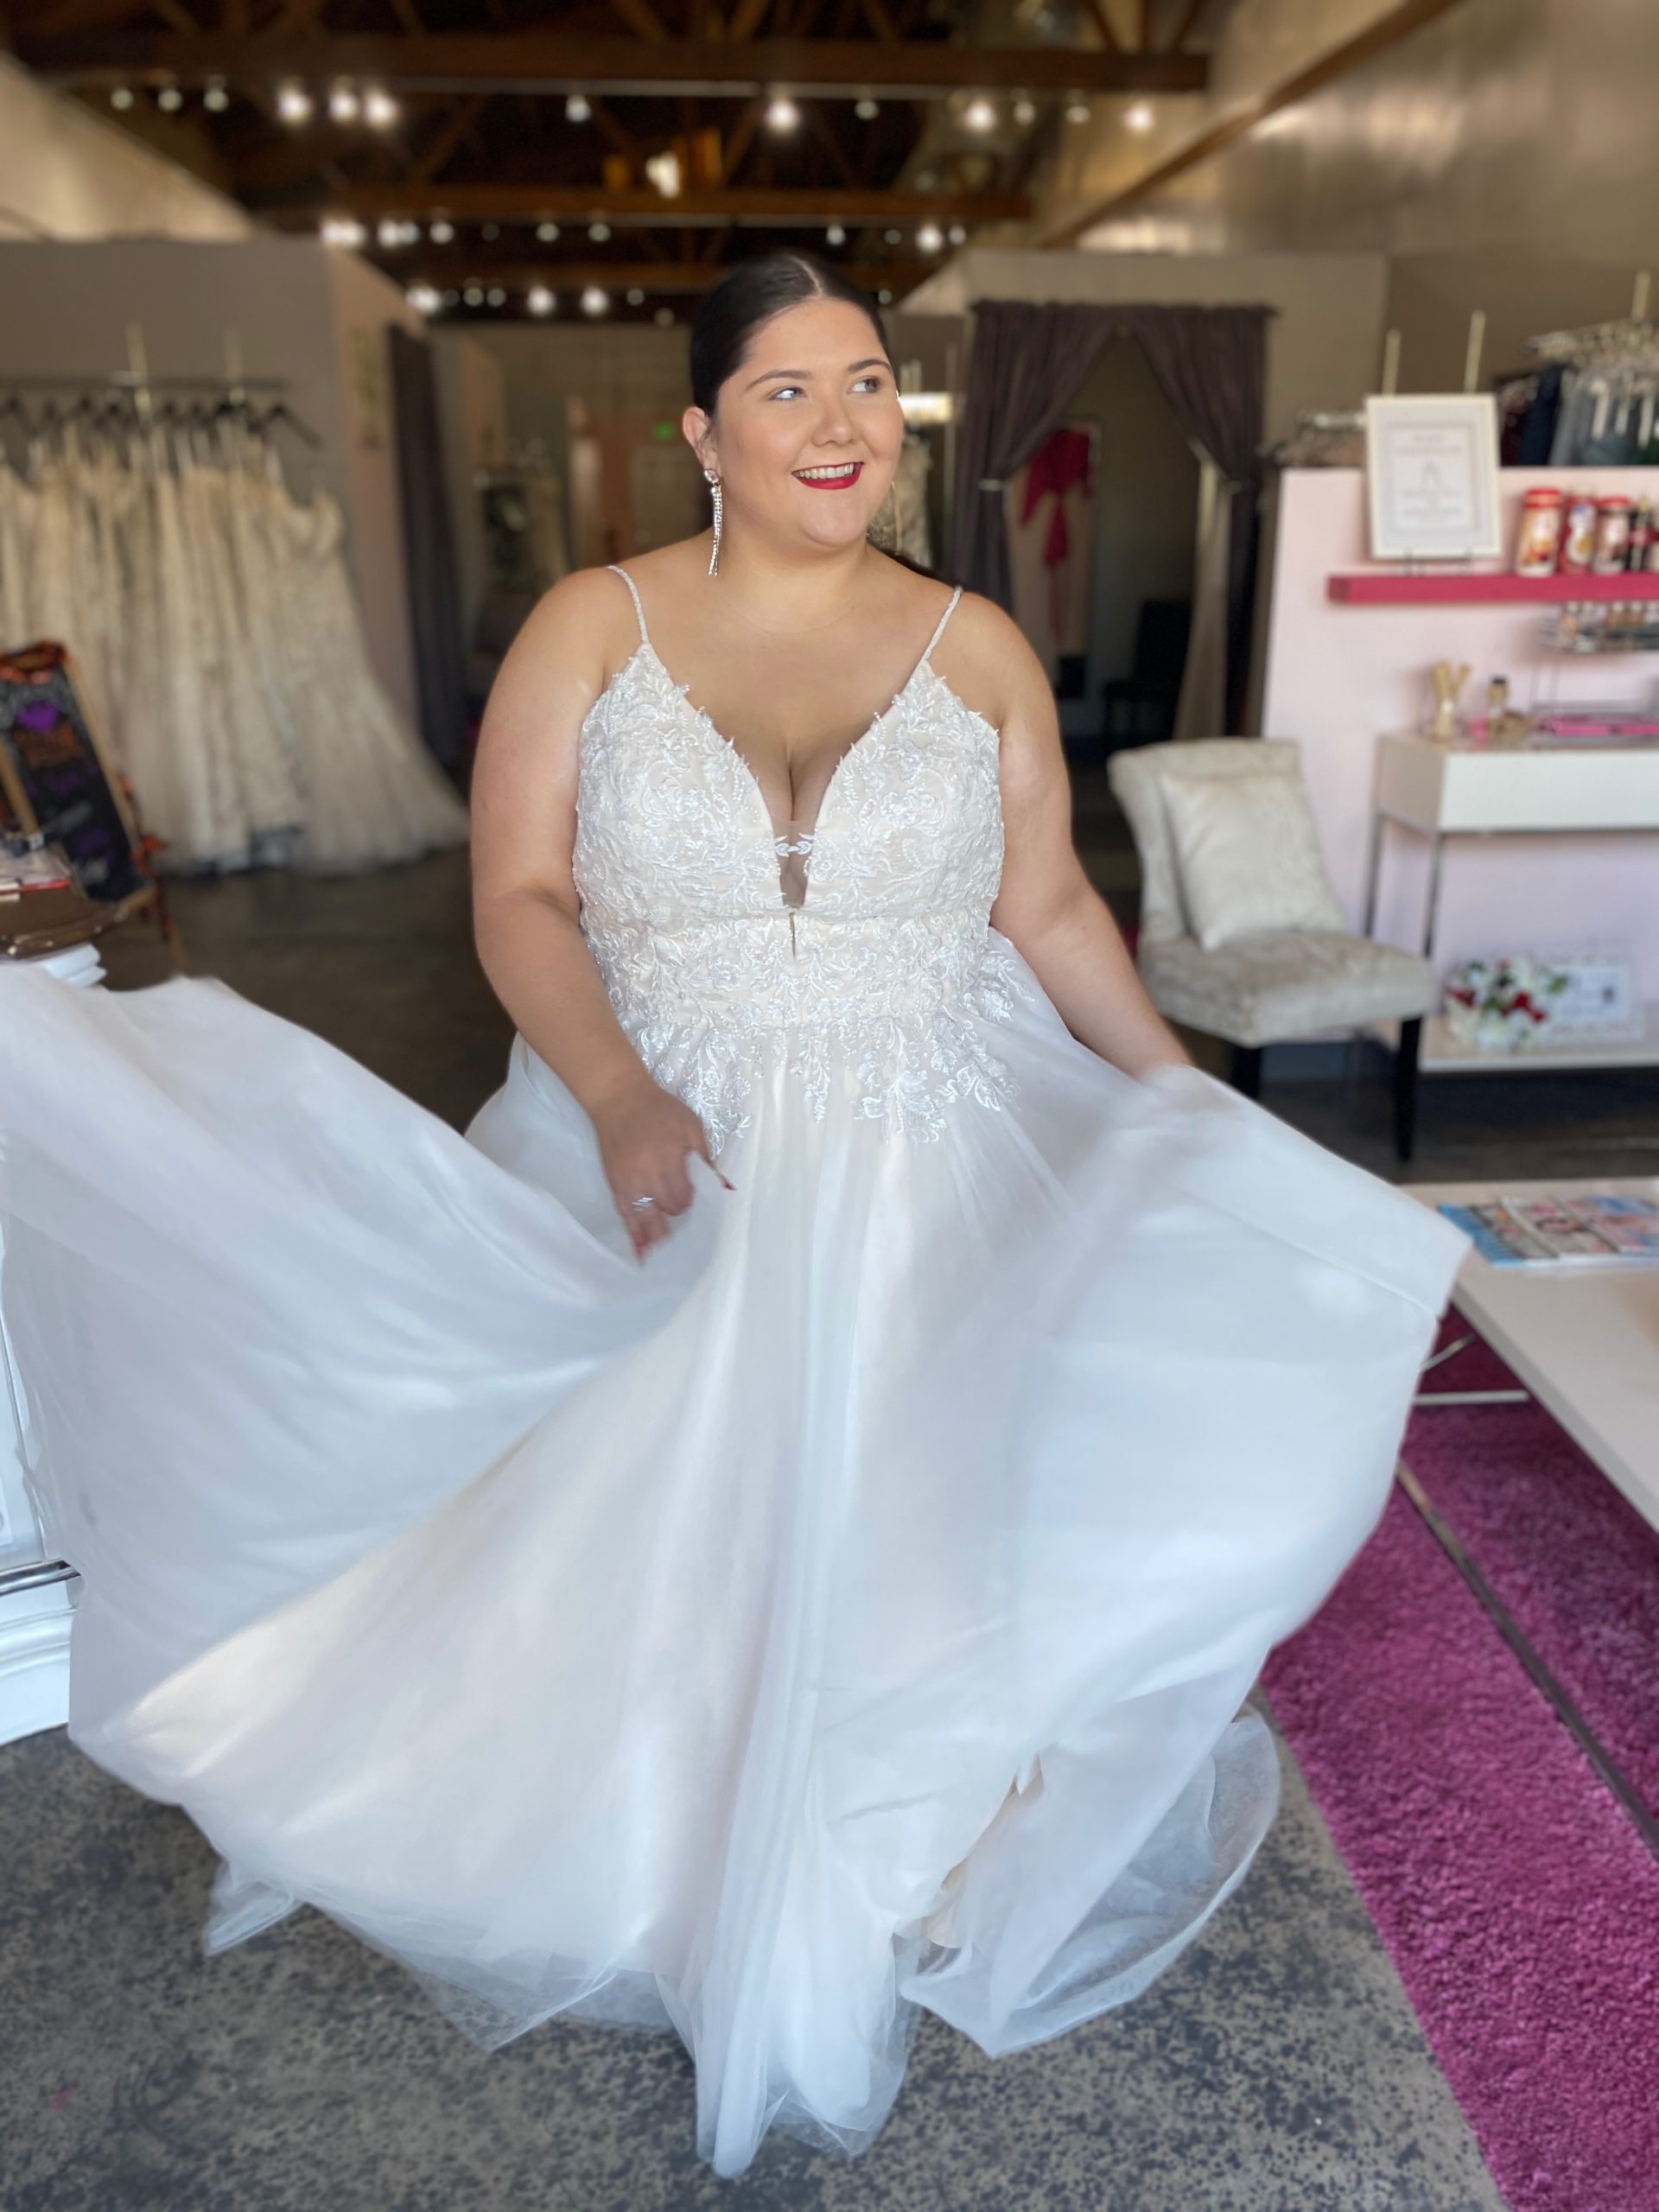 New Plus Size Wedding Dress Arrivals for 2021 Weddings!